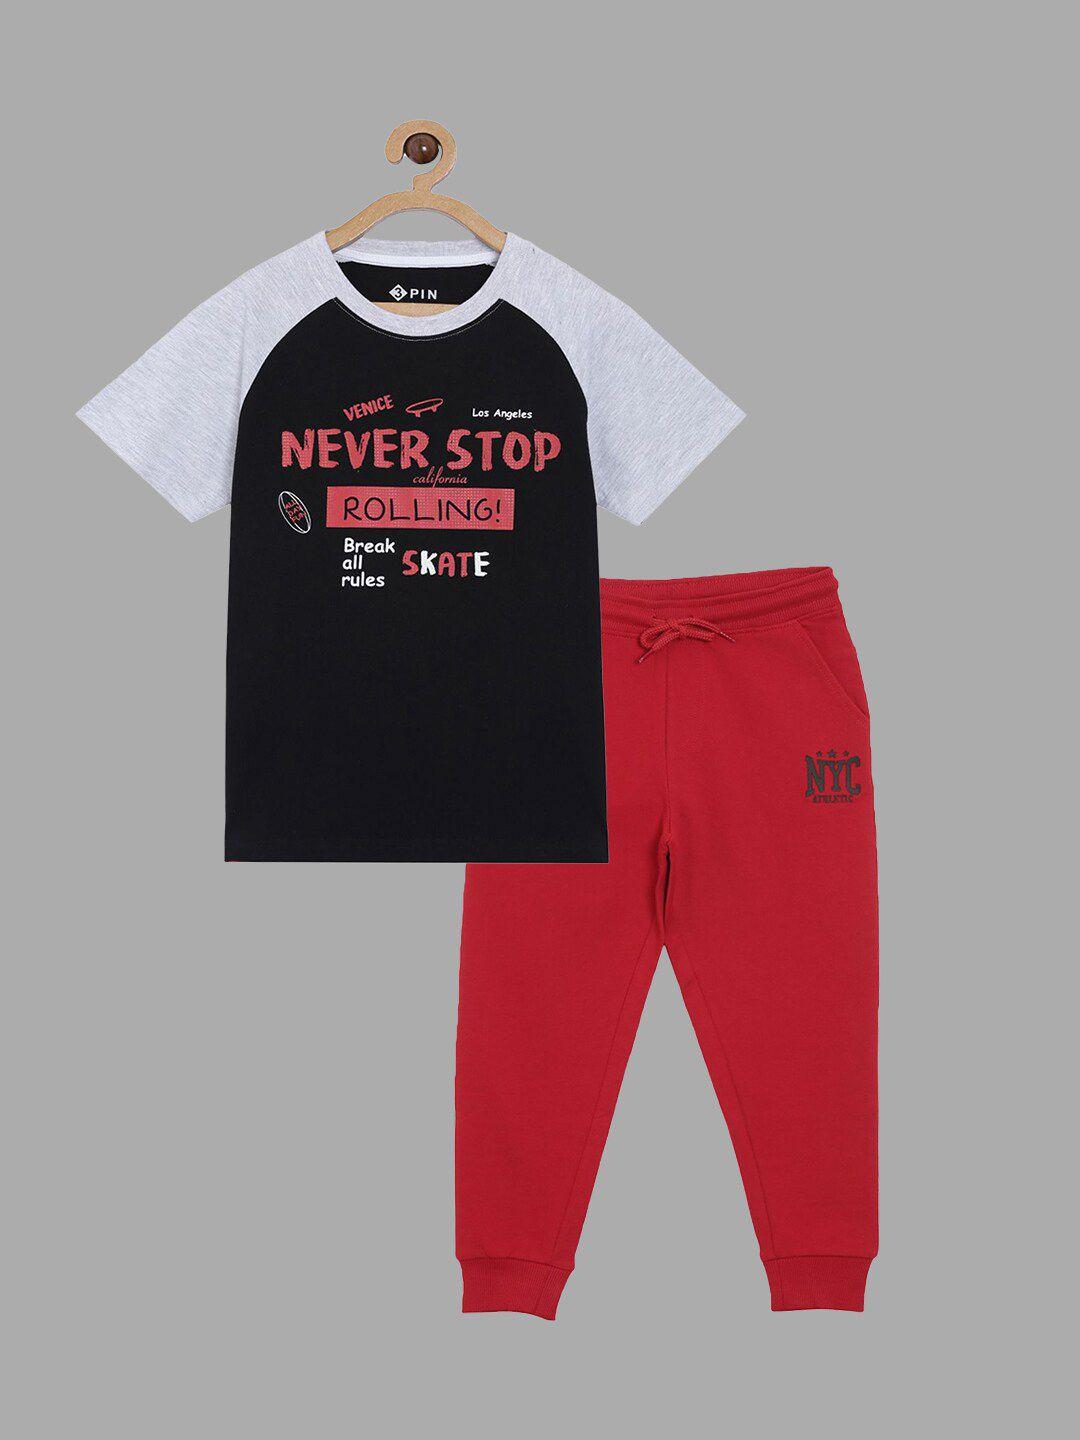 3pin boys black & red printed t-shirt with trousers